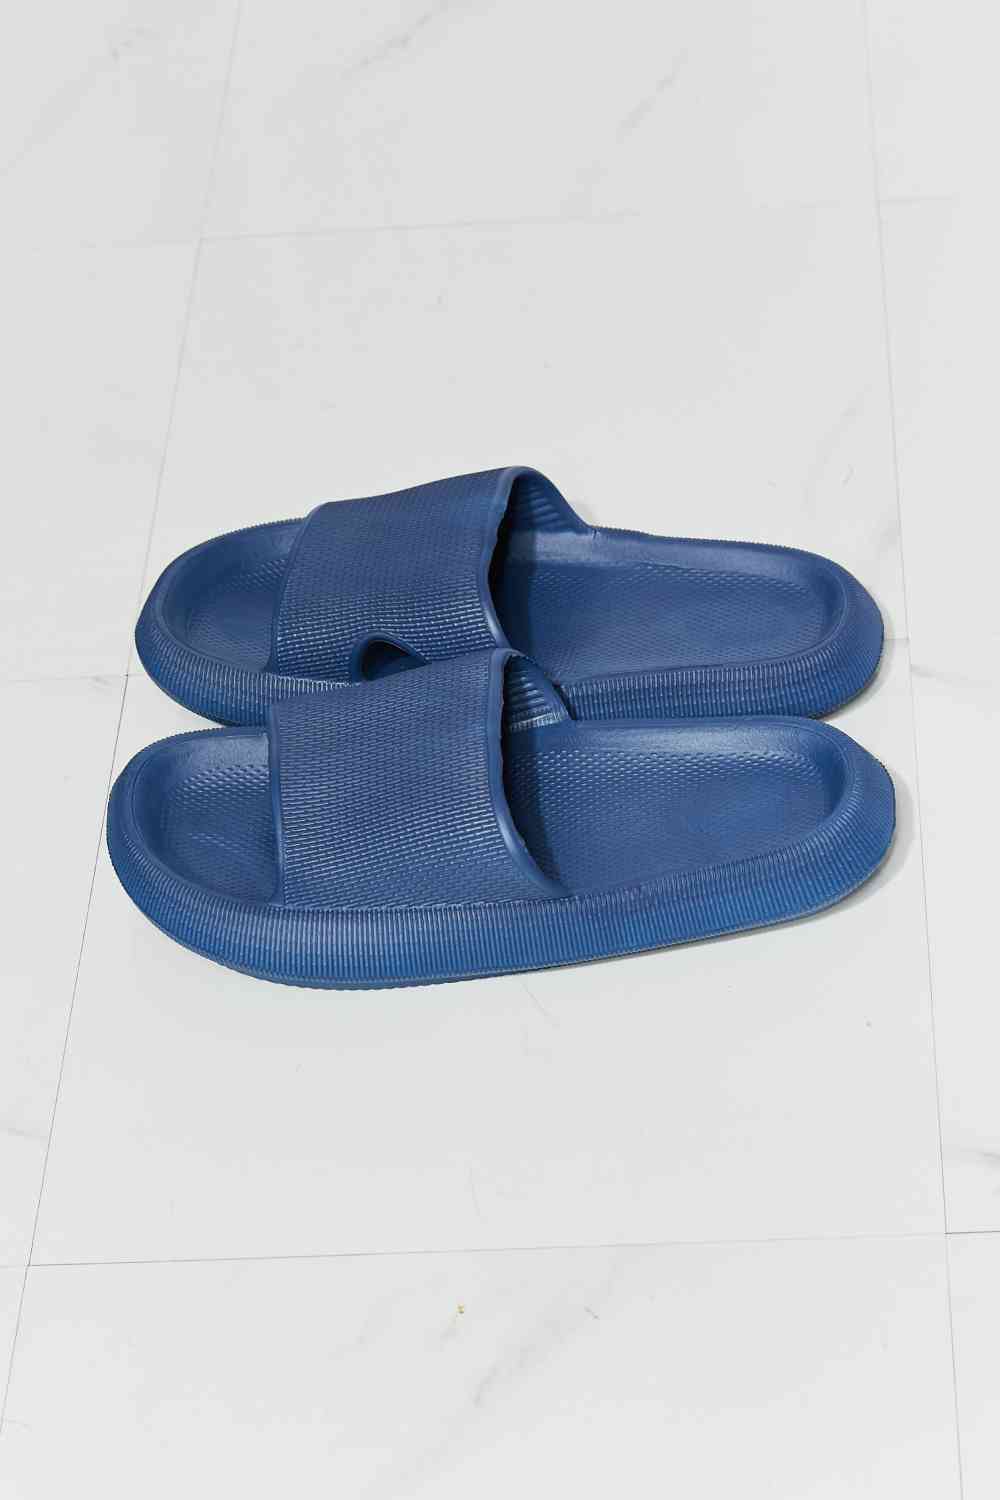 Arms Around Me Open Toe Slide in Navy - Accessories - Shoes - 6 - 2024